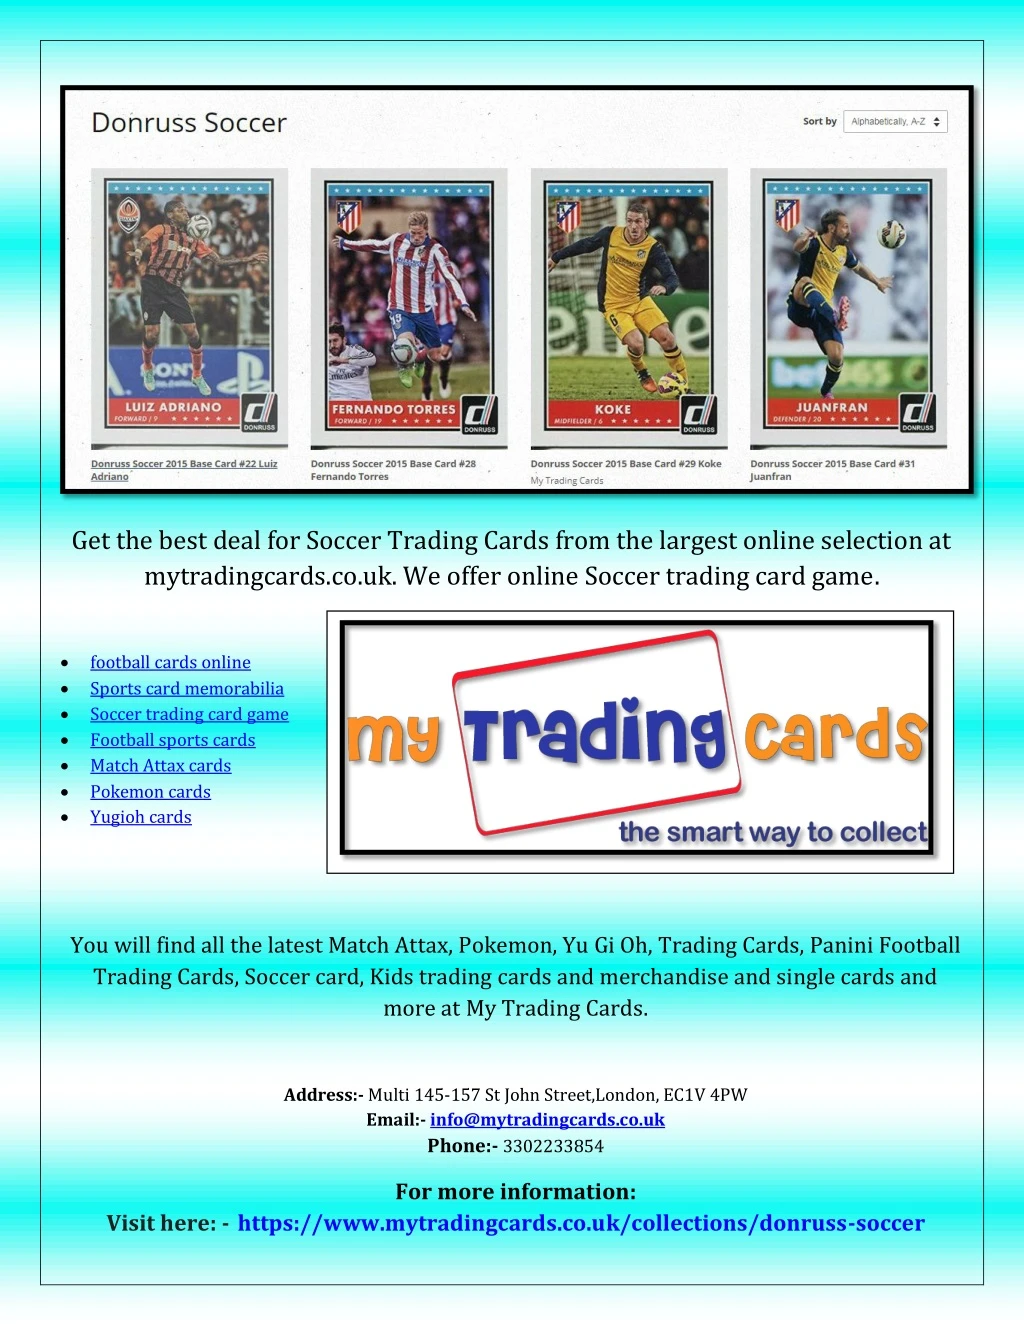 get the best deal for soccer trading cards from